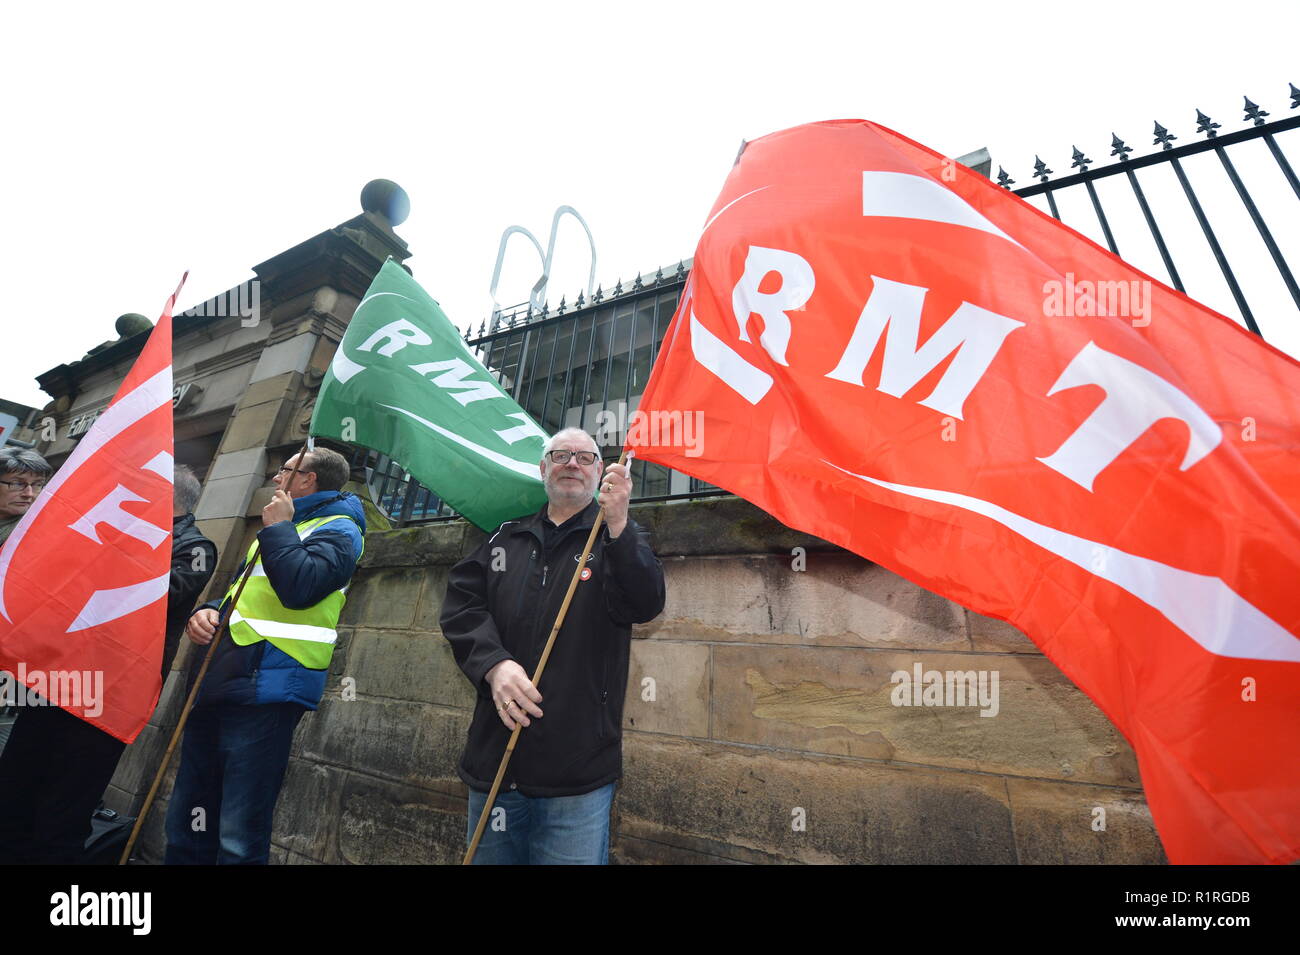 Edinburgh, UK. 14th Nov, 2018. RMT Union (National Union of Rail, Maritime and Transport Workers) members protests Ahead of a Holyrood vote calling for the ScotRail break clause to be exercised, Scottish Labour leader Richard Leonard and Transport spokesperson Colin Smyth campaign at Waverley station. Credit: Colin Fisher/Alamy Live News Stock Photo